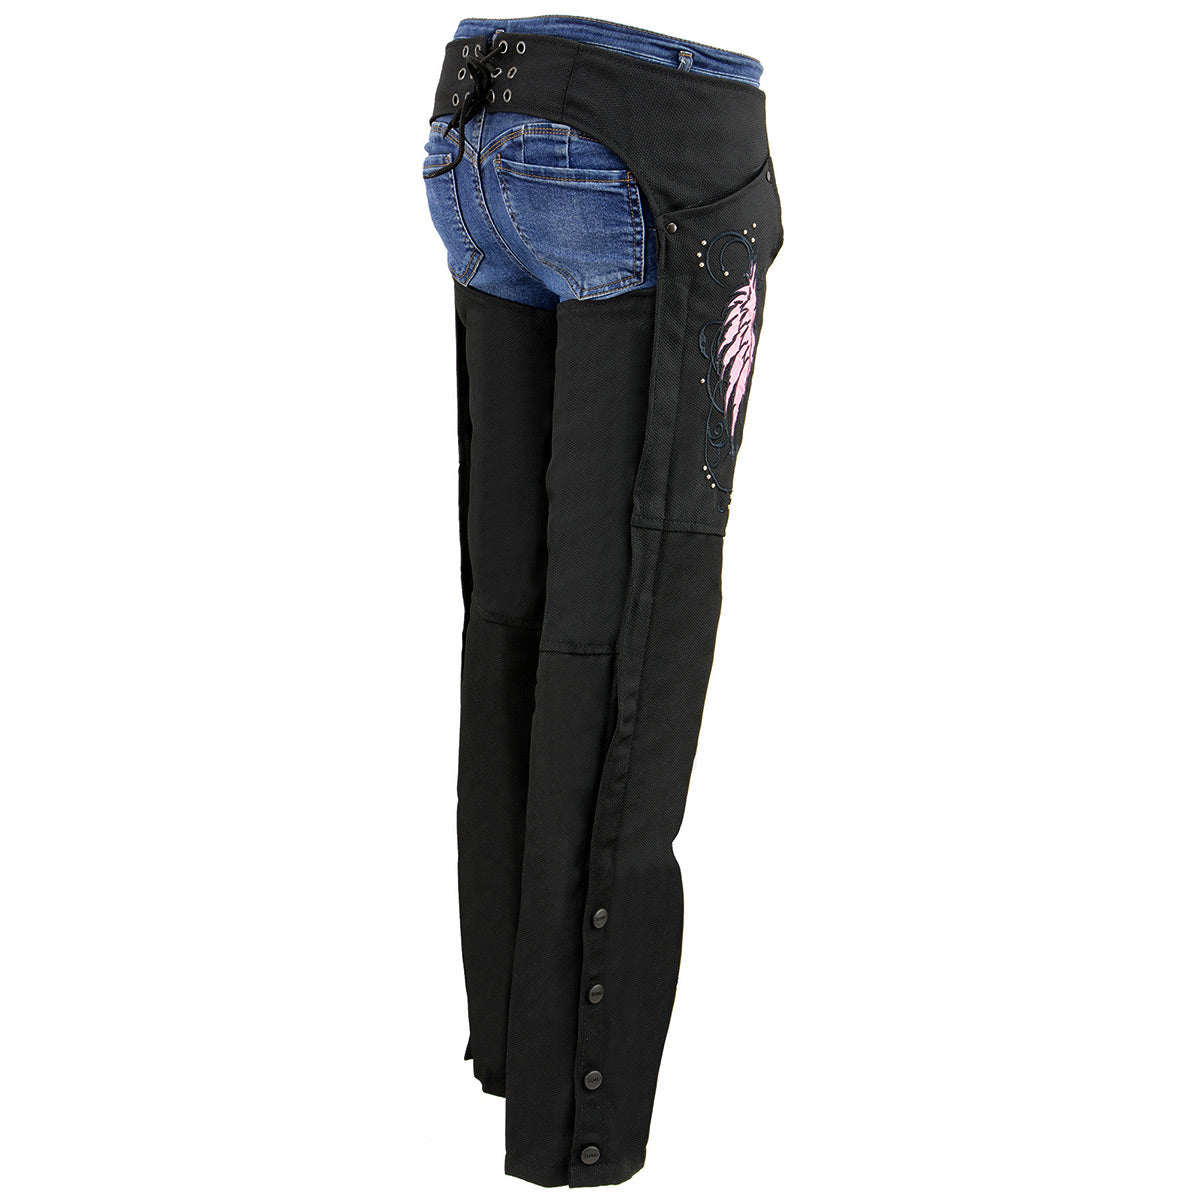 Milwaukee Leather SH1956 Women's 'Winged' Black and Pink Textile Chaps